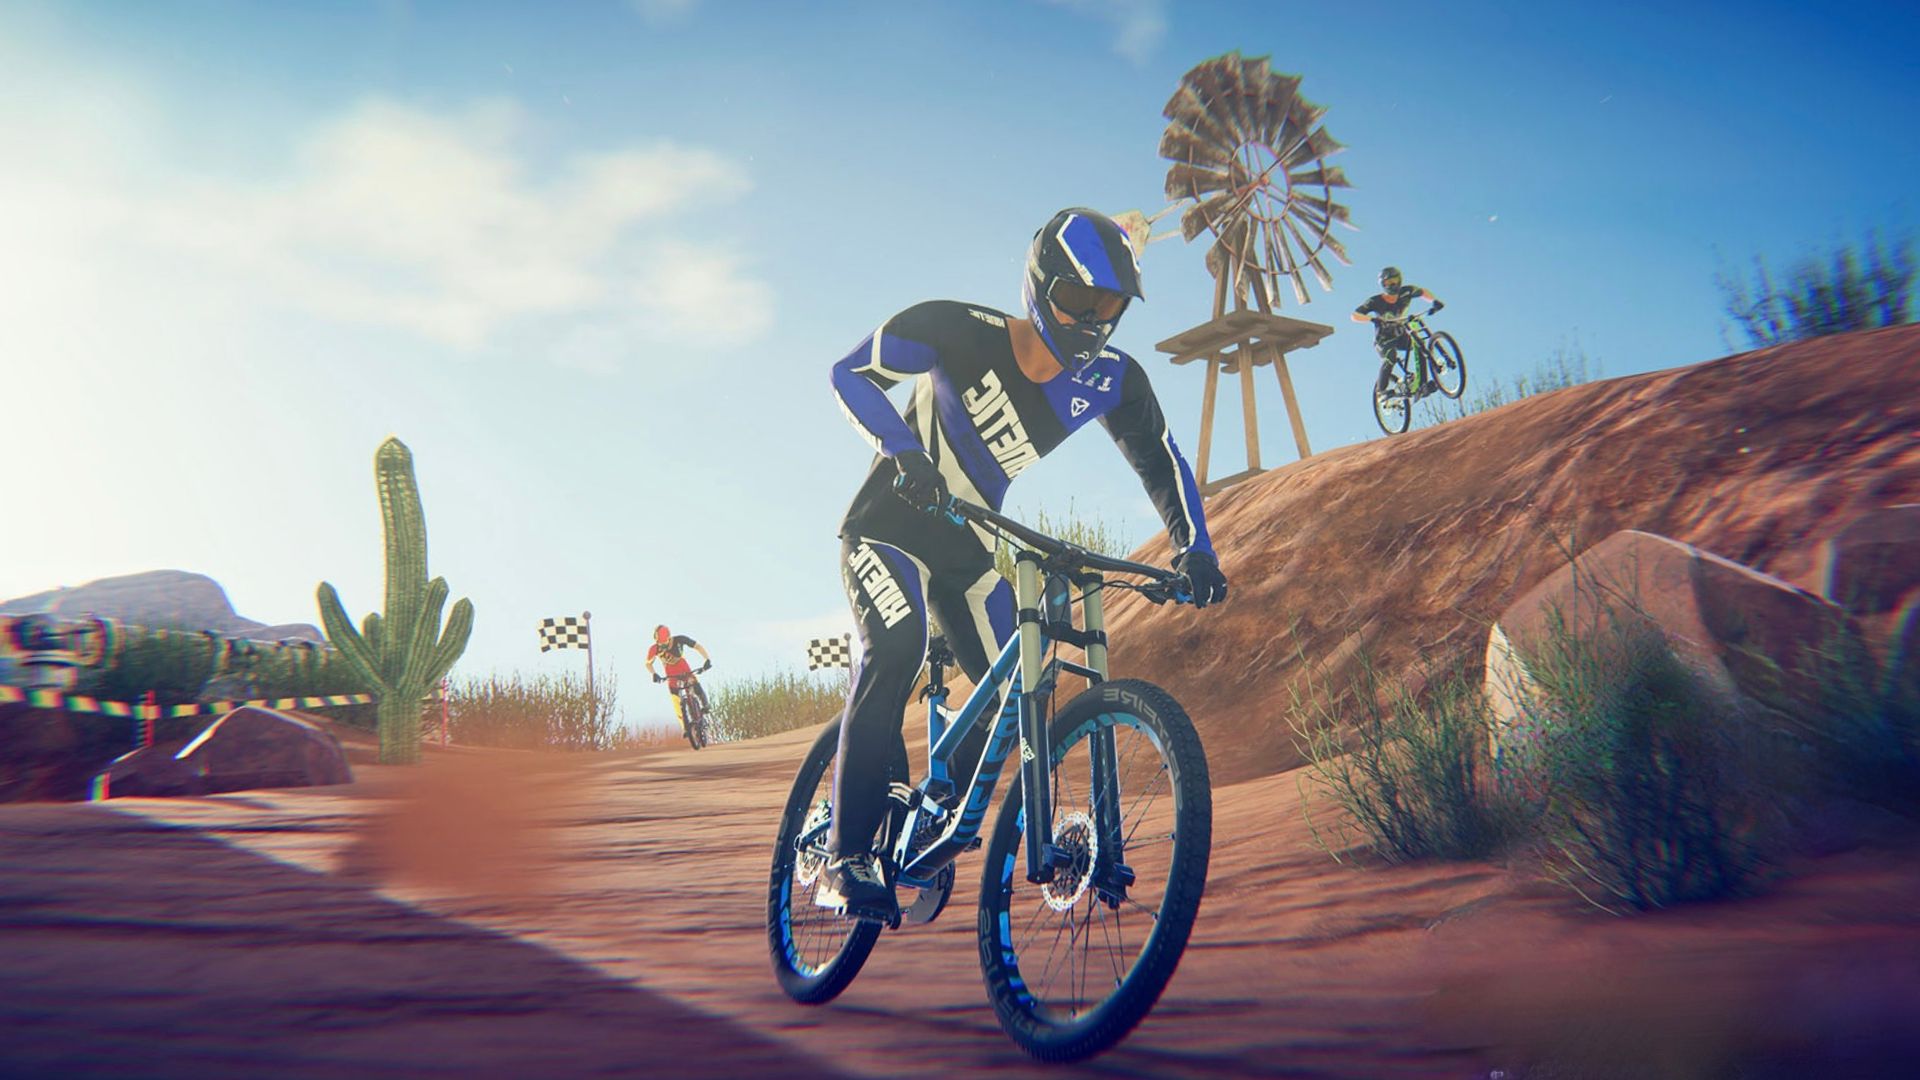 Screenshot taken from Descenders which will be available on PlayStation Plus Essential in May